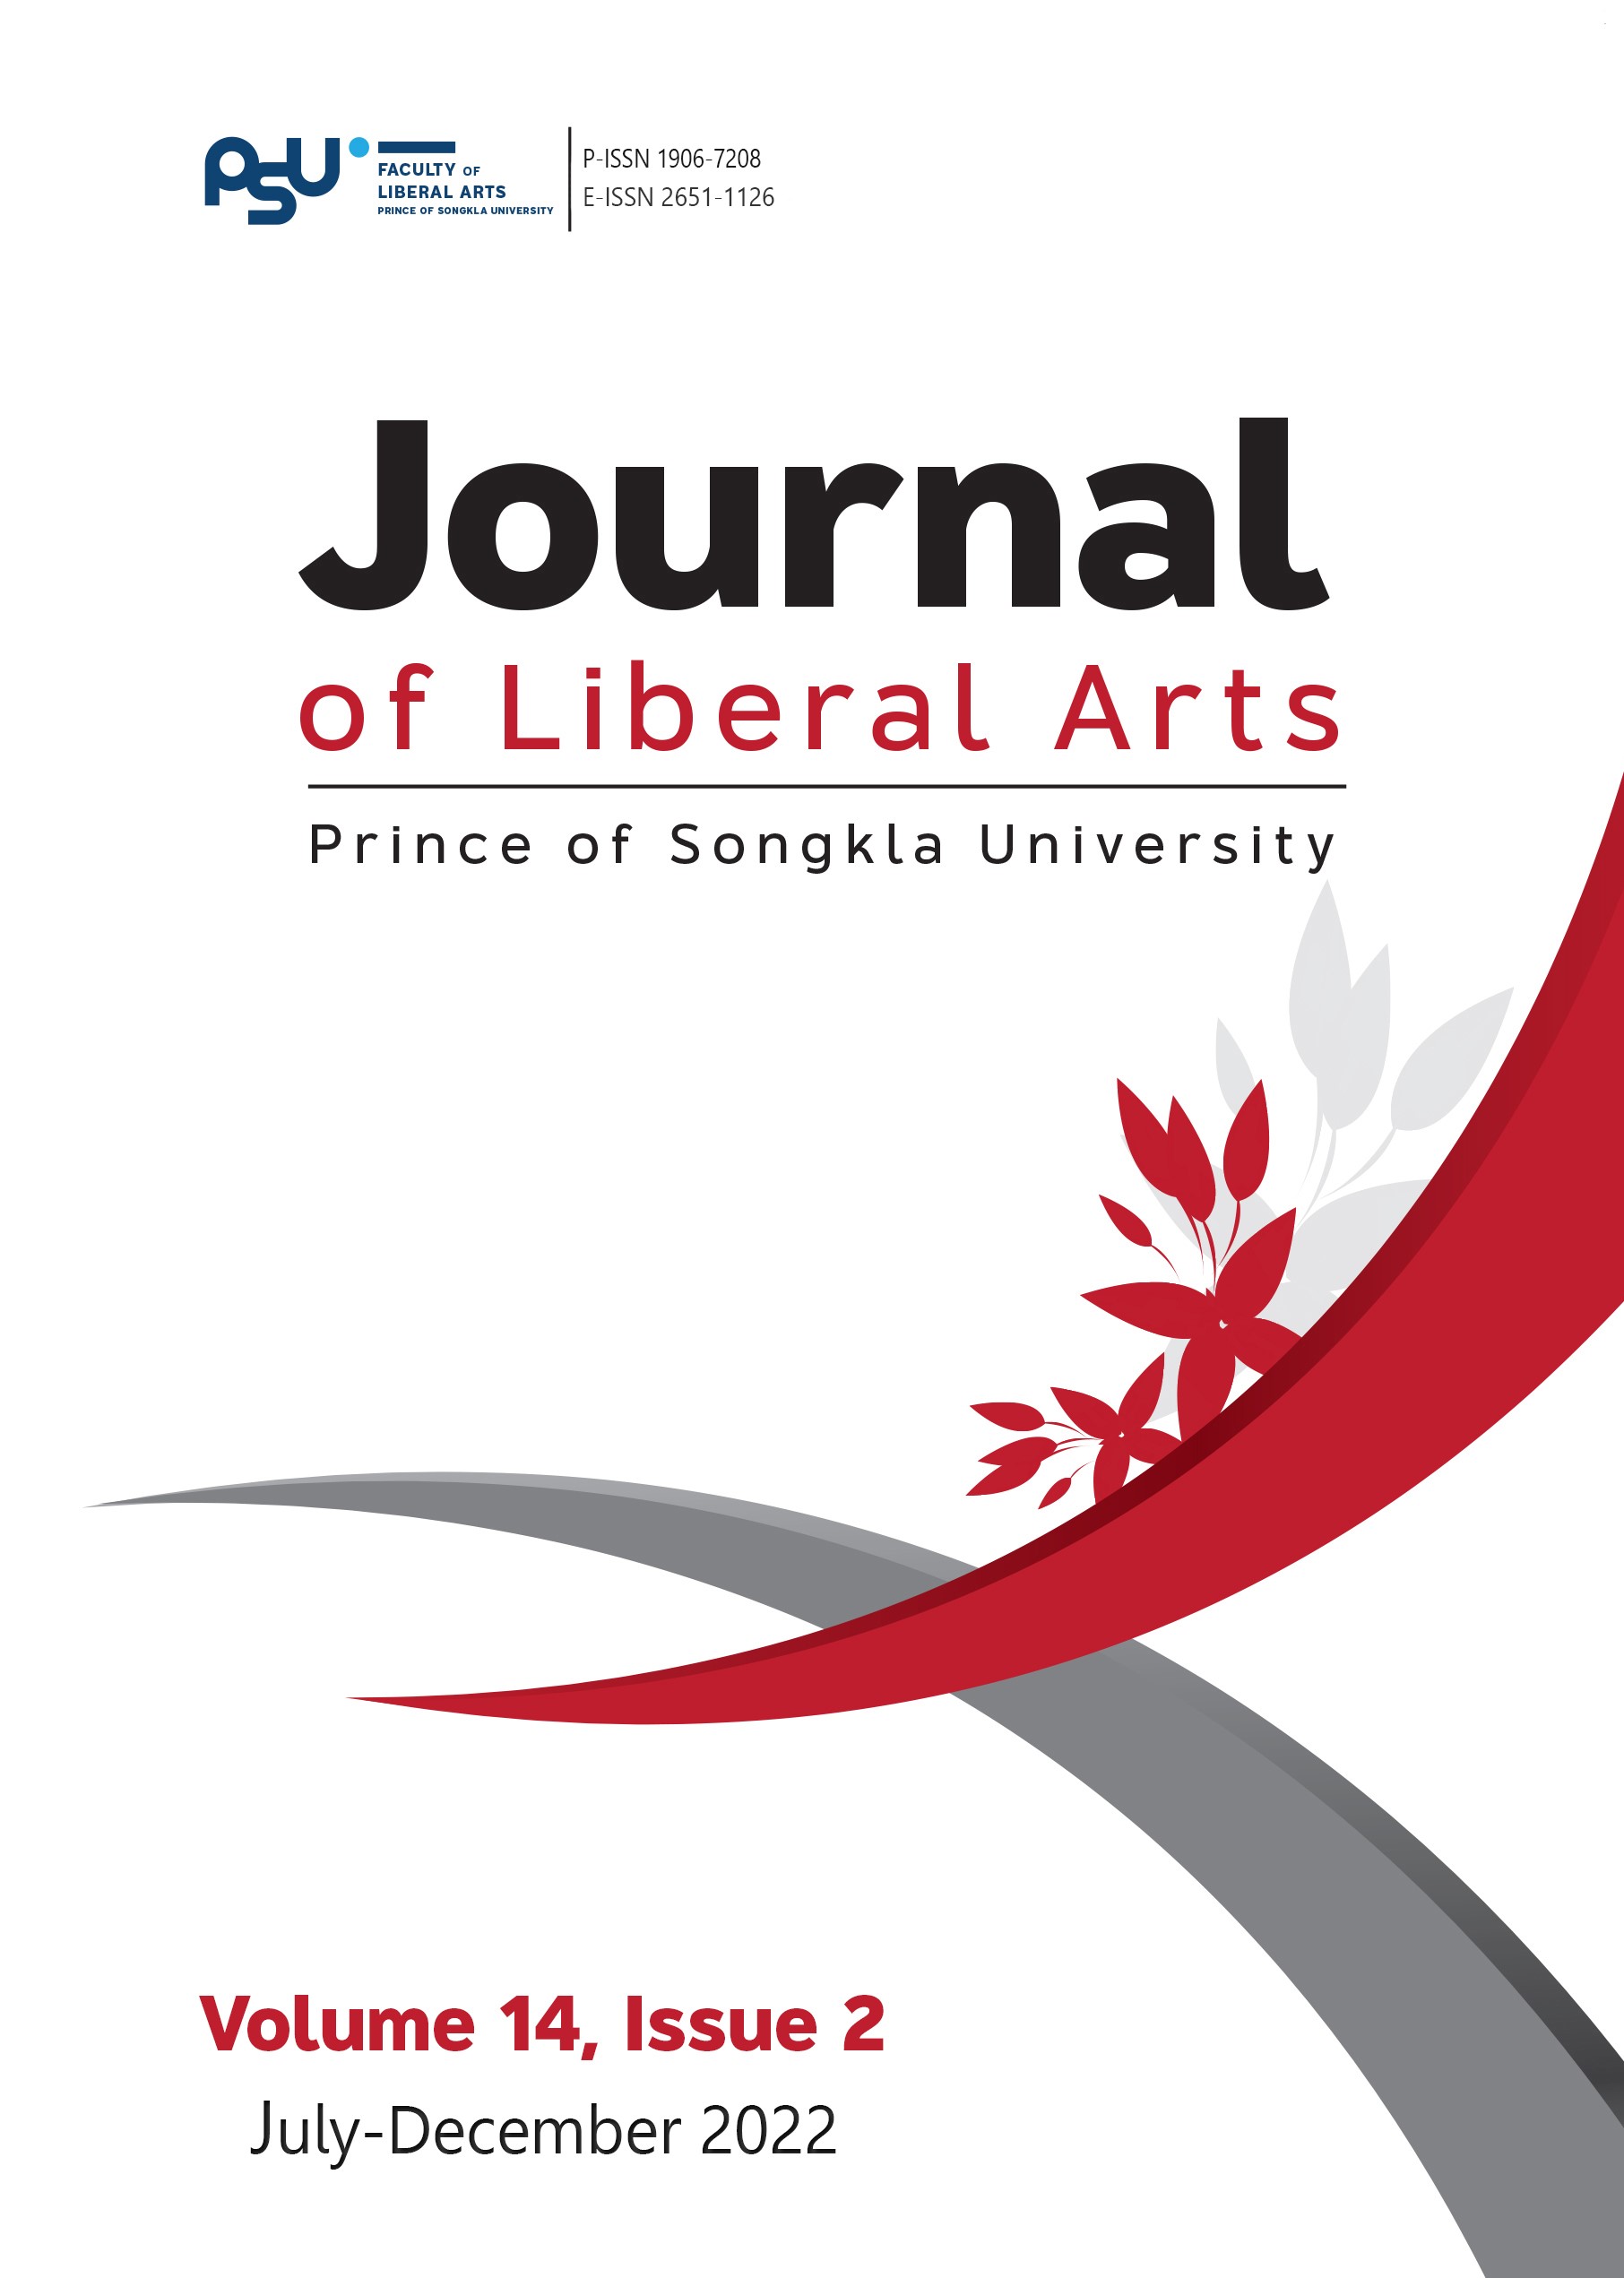 					View Vol. 14 No. 2 (2022): Journal of Liberal Arts , Prince of Songkla University
				